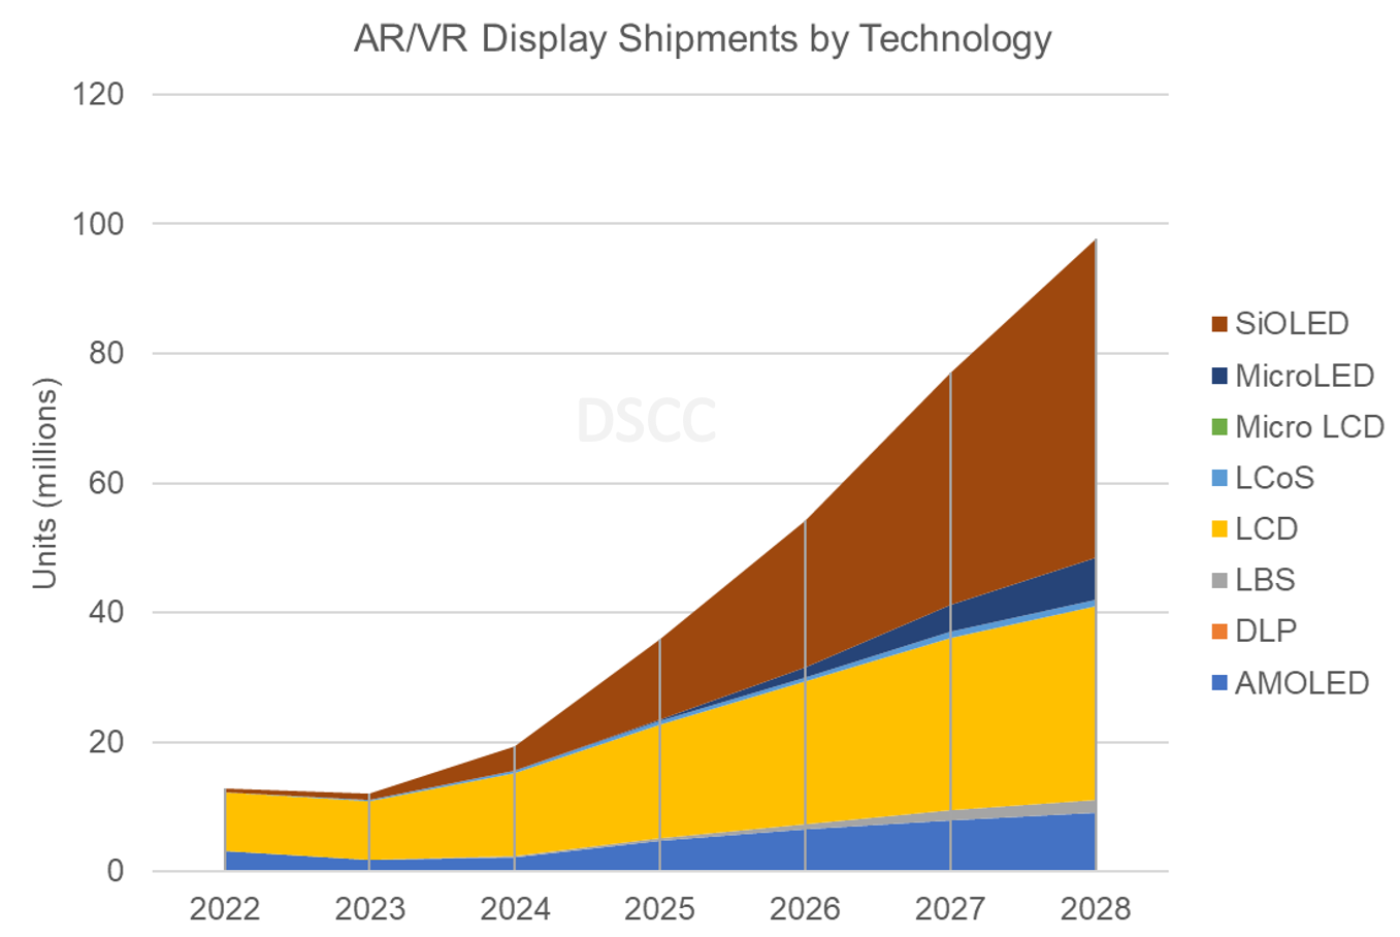 Source: DSCC’s Augmented and Virtual Reality Display Technologies and Market Report